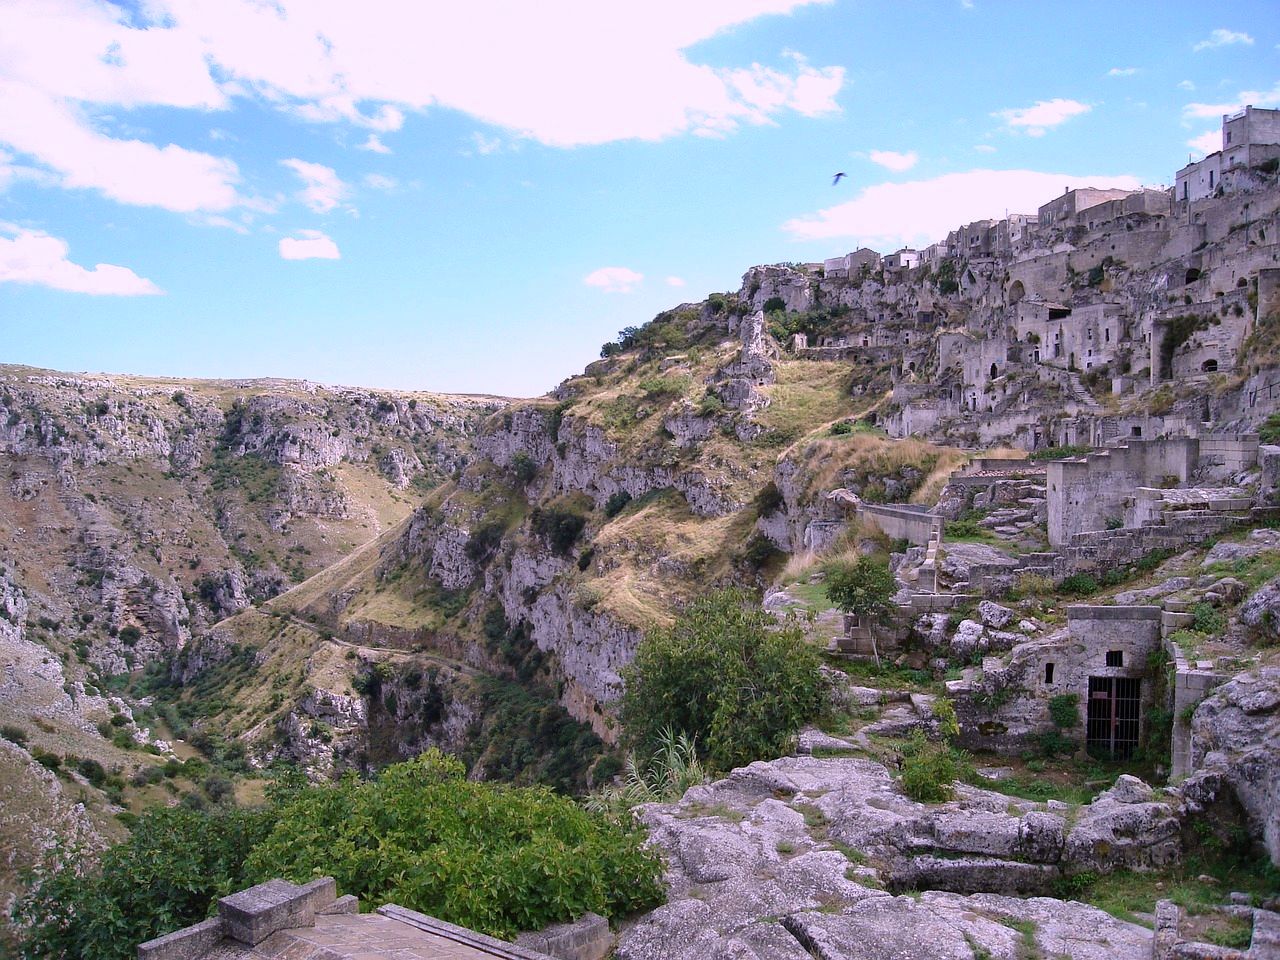 Troglodyte caves in Matera, Italy